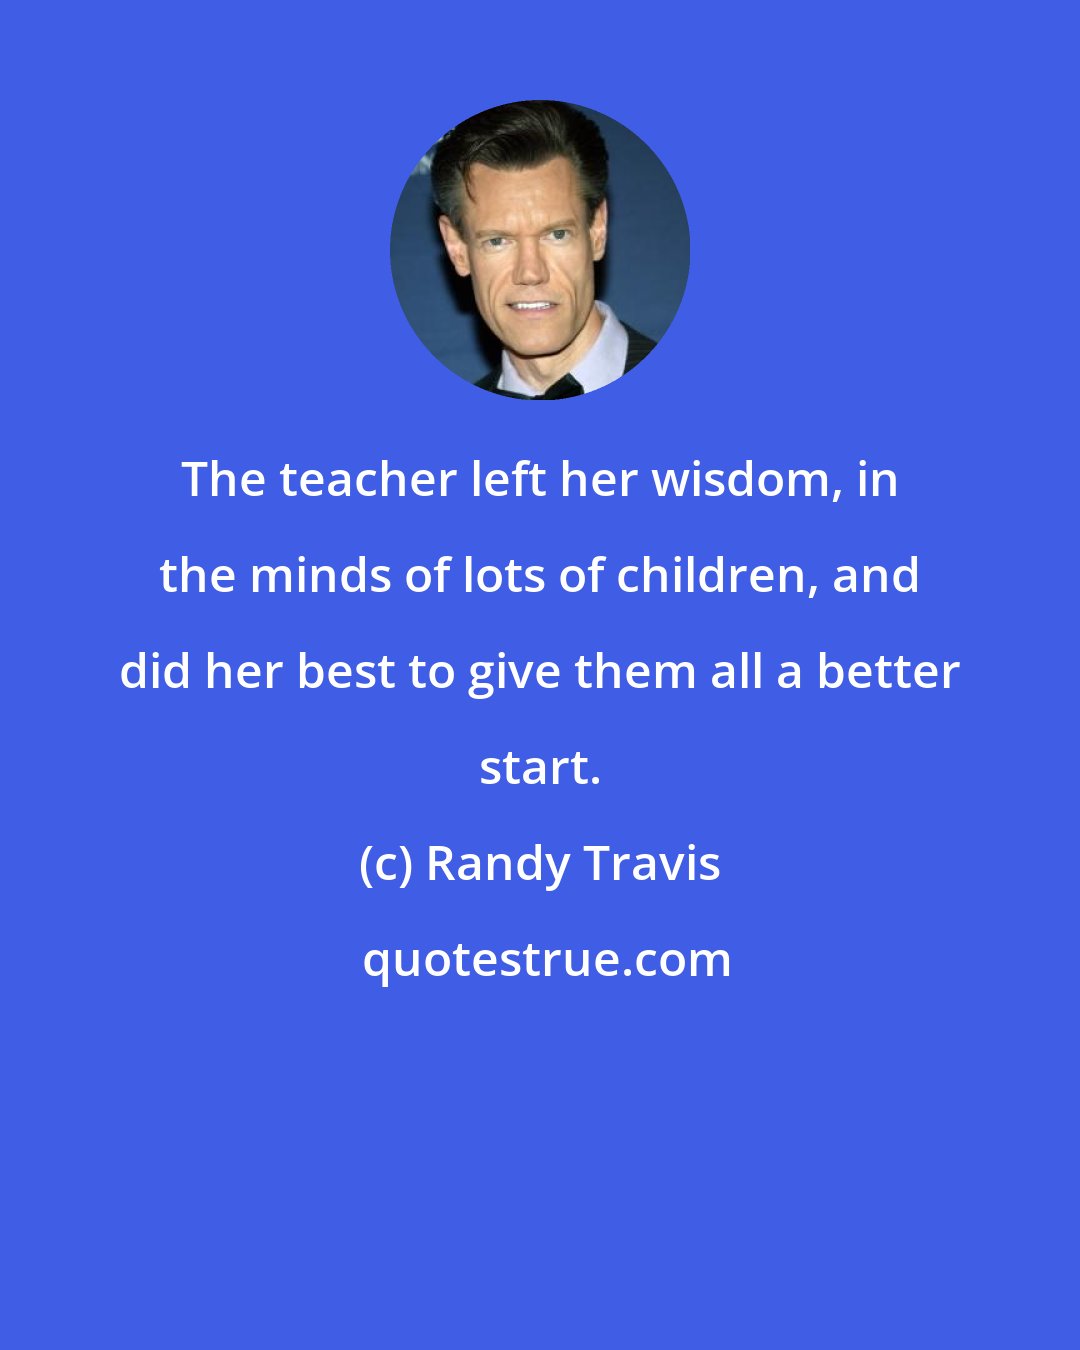 Randy Travis: The teacher left her wisdom, in the minds of lots of children, and did her best to give them all a better start.